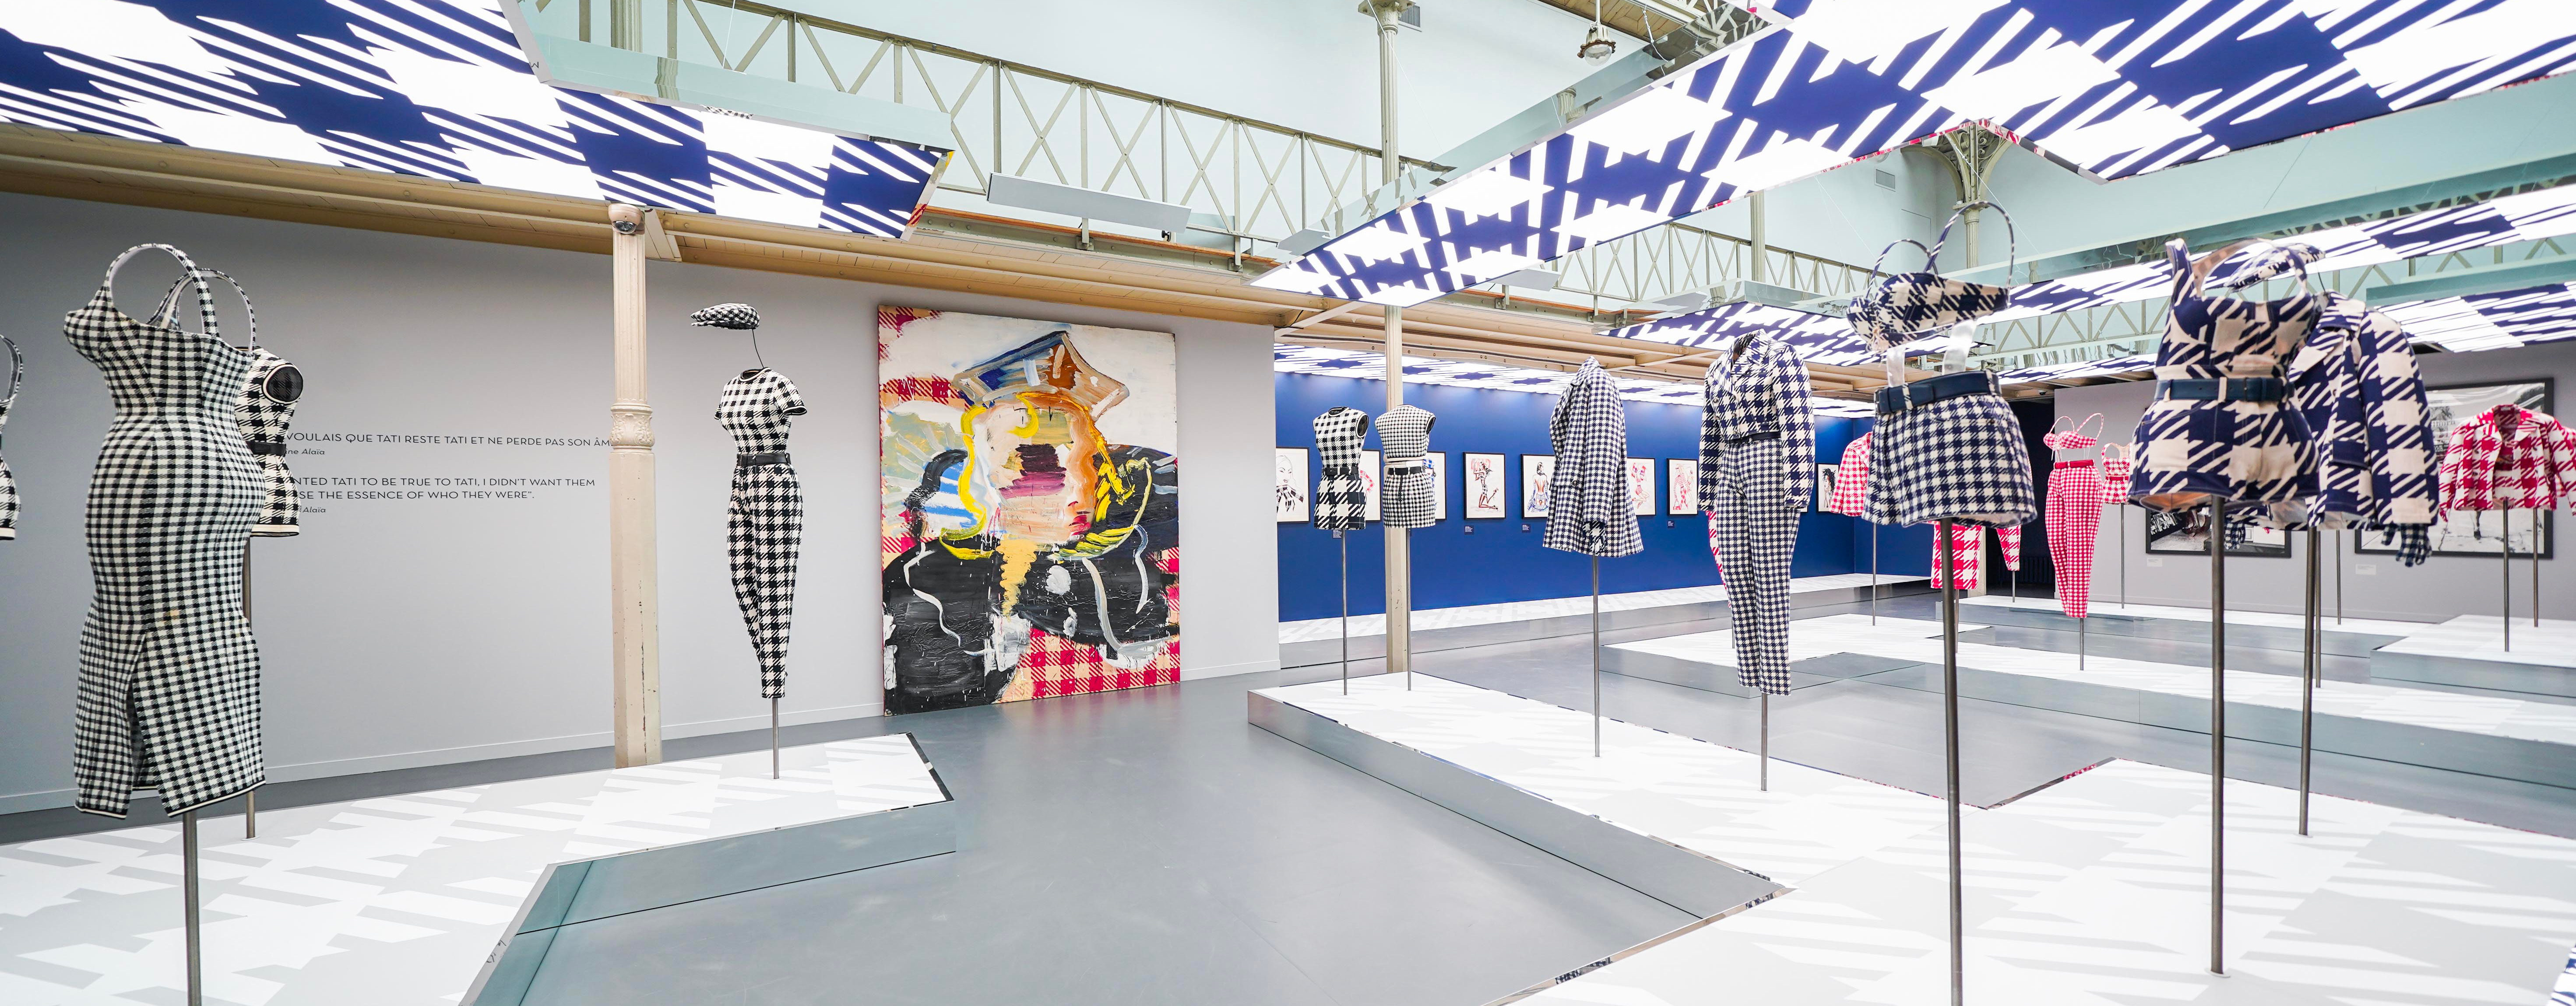 Louis Vuitton Masters continues Jeff Koons collection - Inside Retail Asia